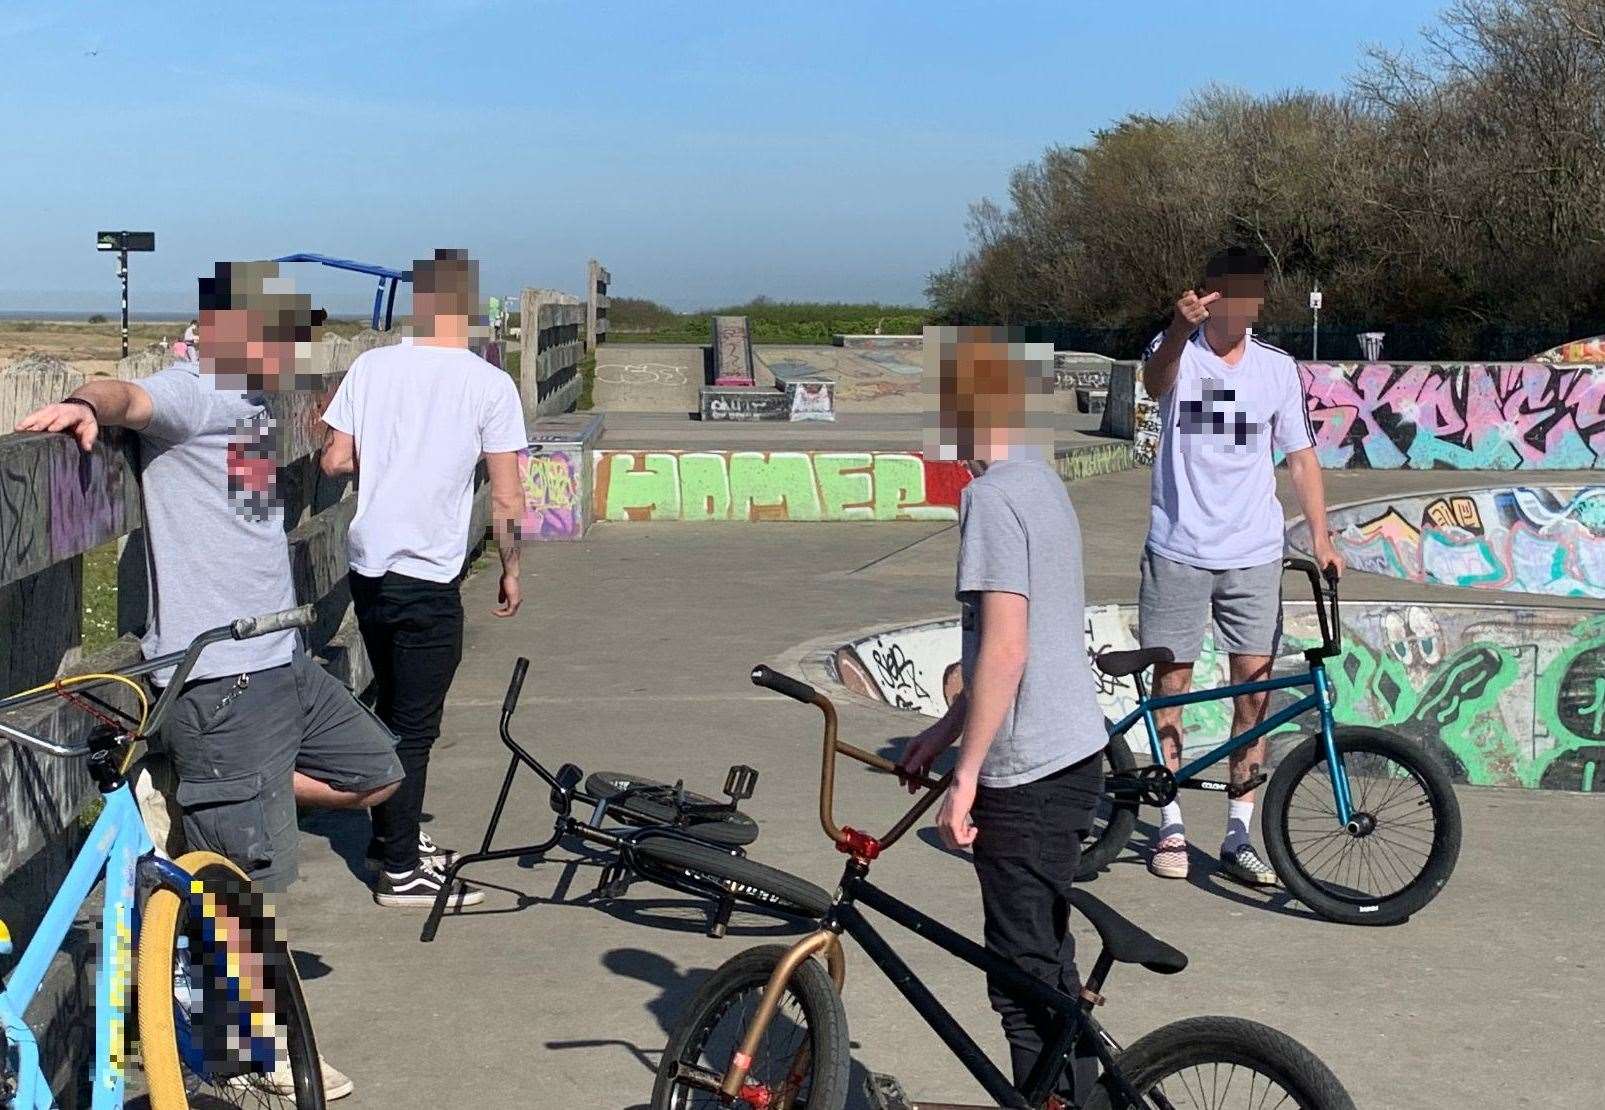 One of the group gives the couple the middle finger after being challenged in the skate park